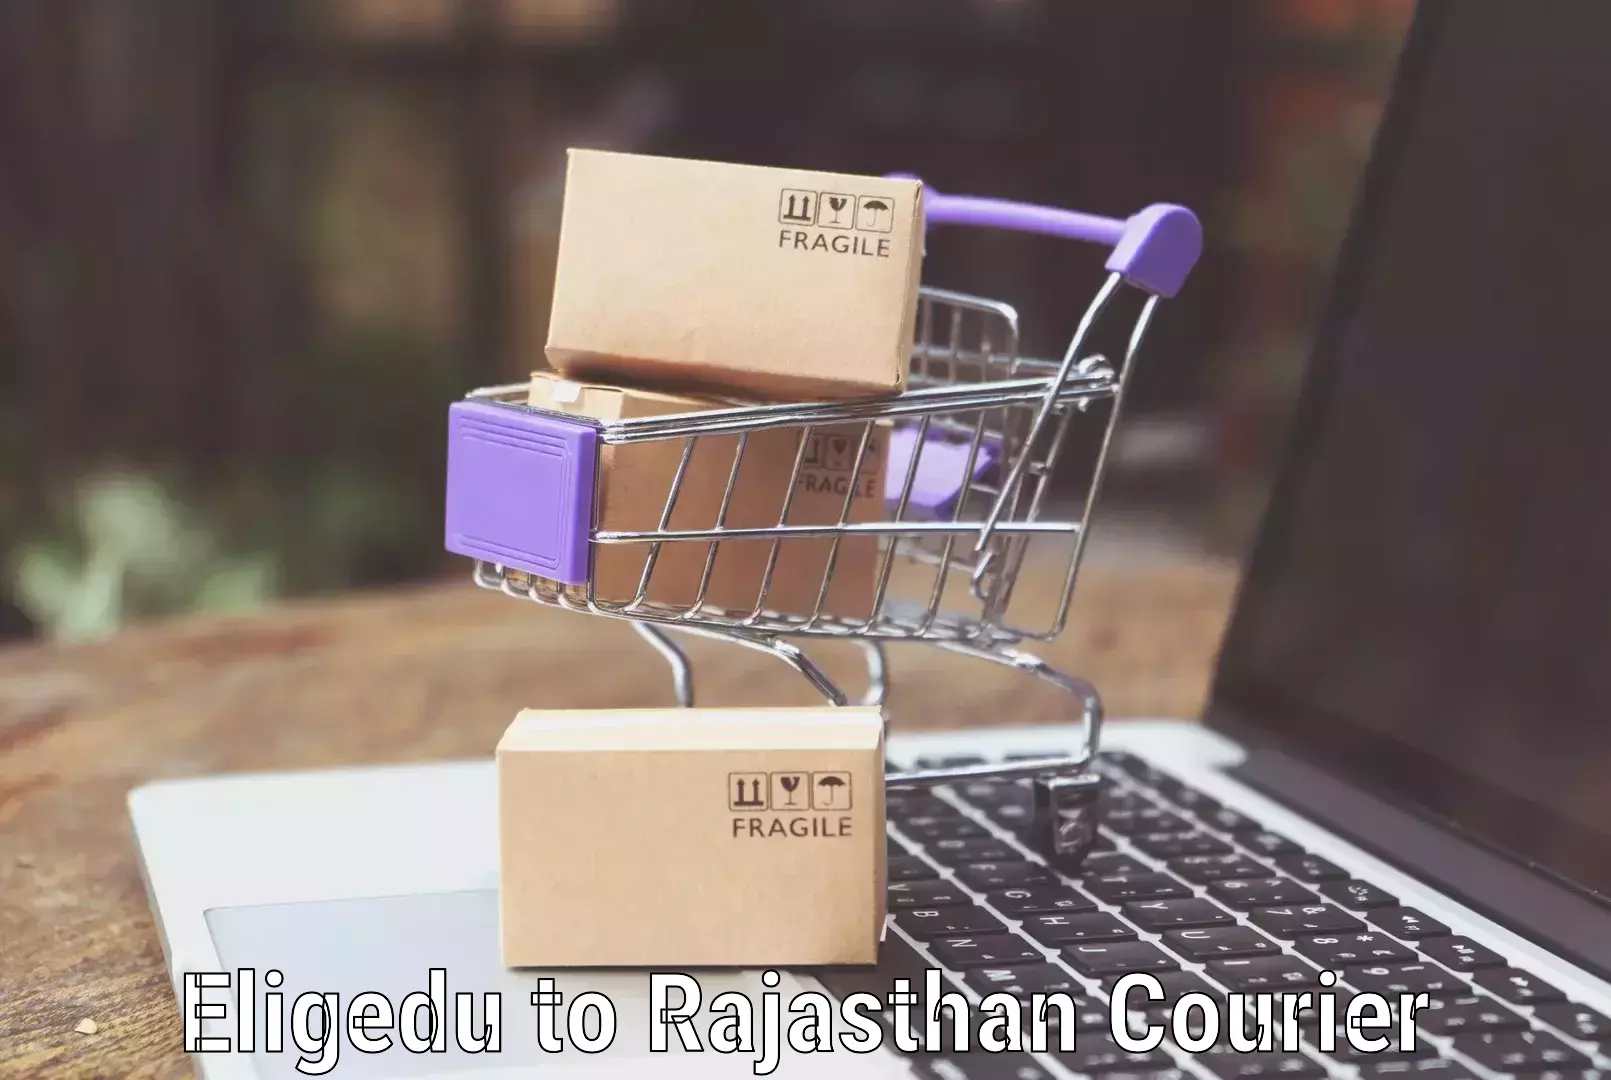 Trackable baggage shipping in Eligedu to Bhatewar